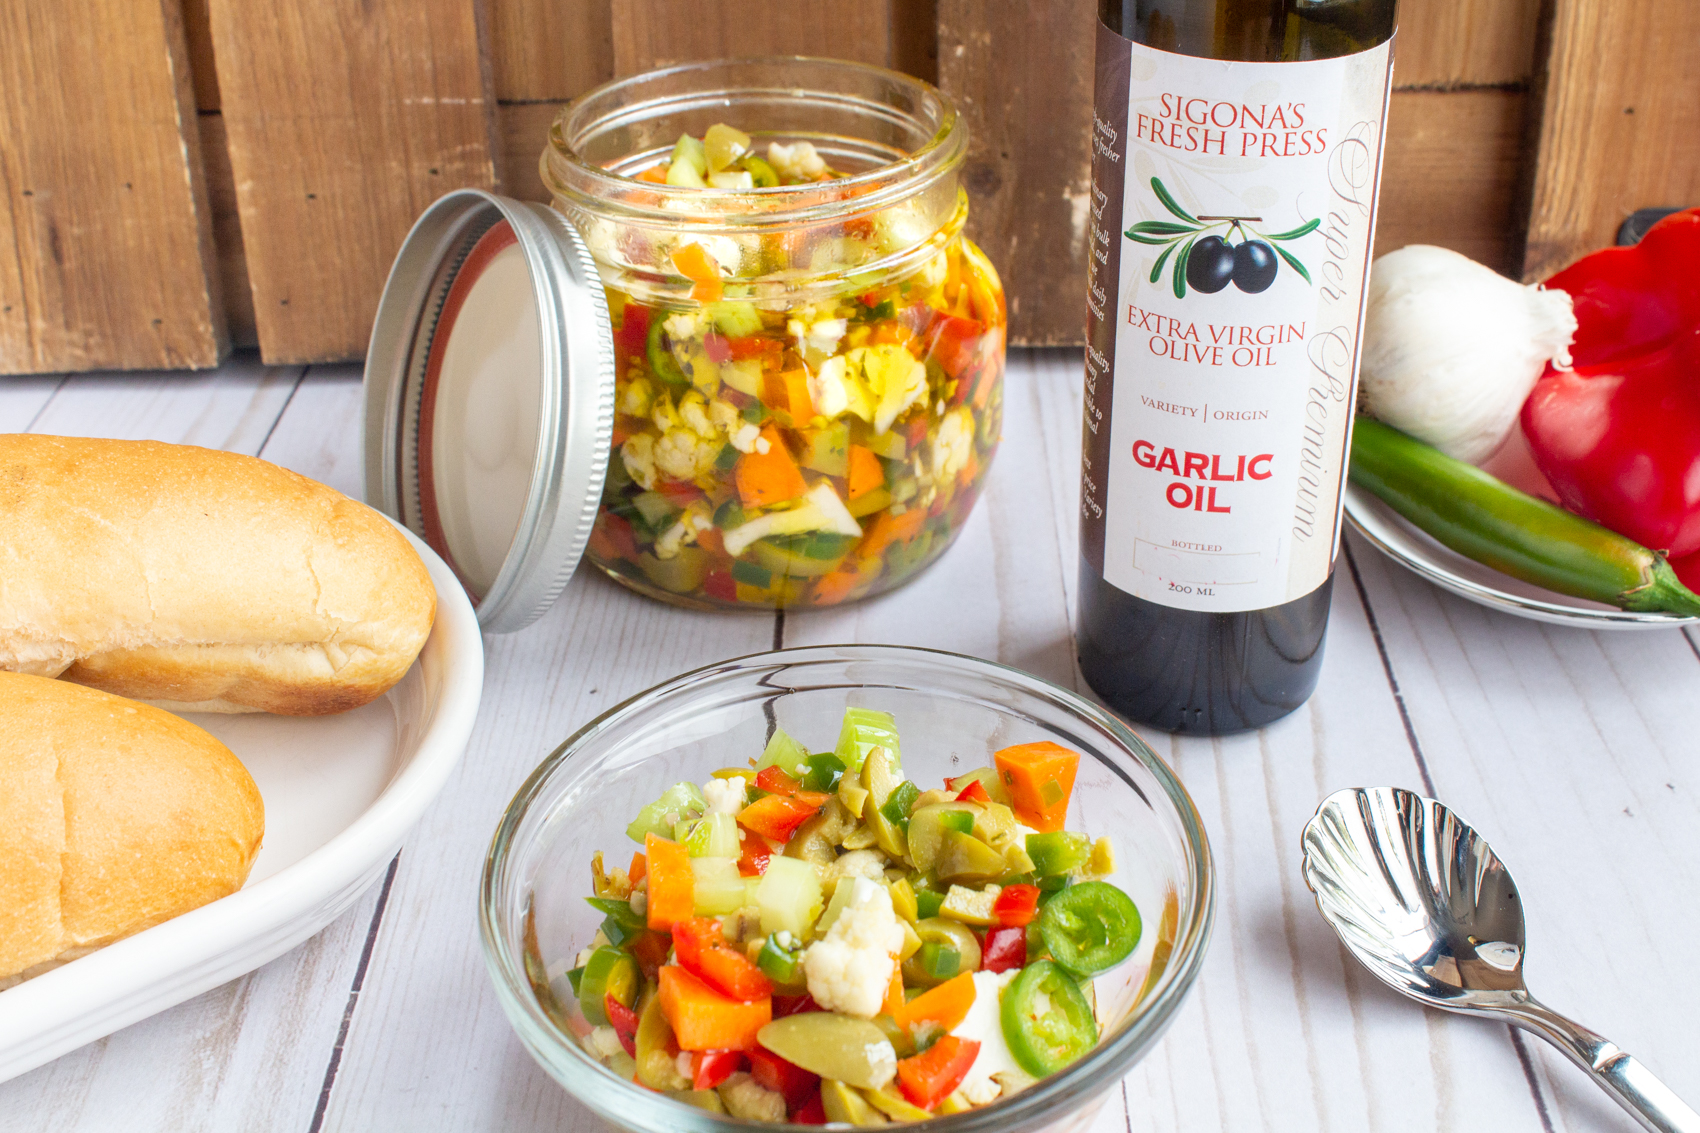 What Is Chicago-Style Giardiniera and How to Use It in Cooking